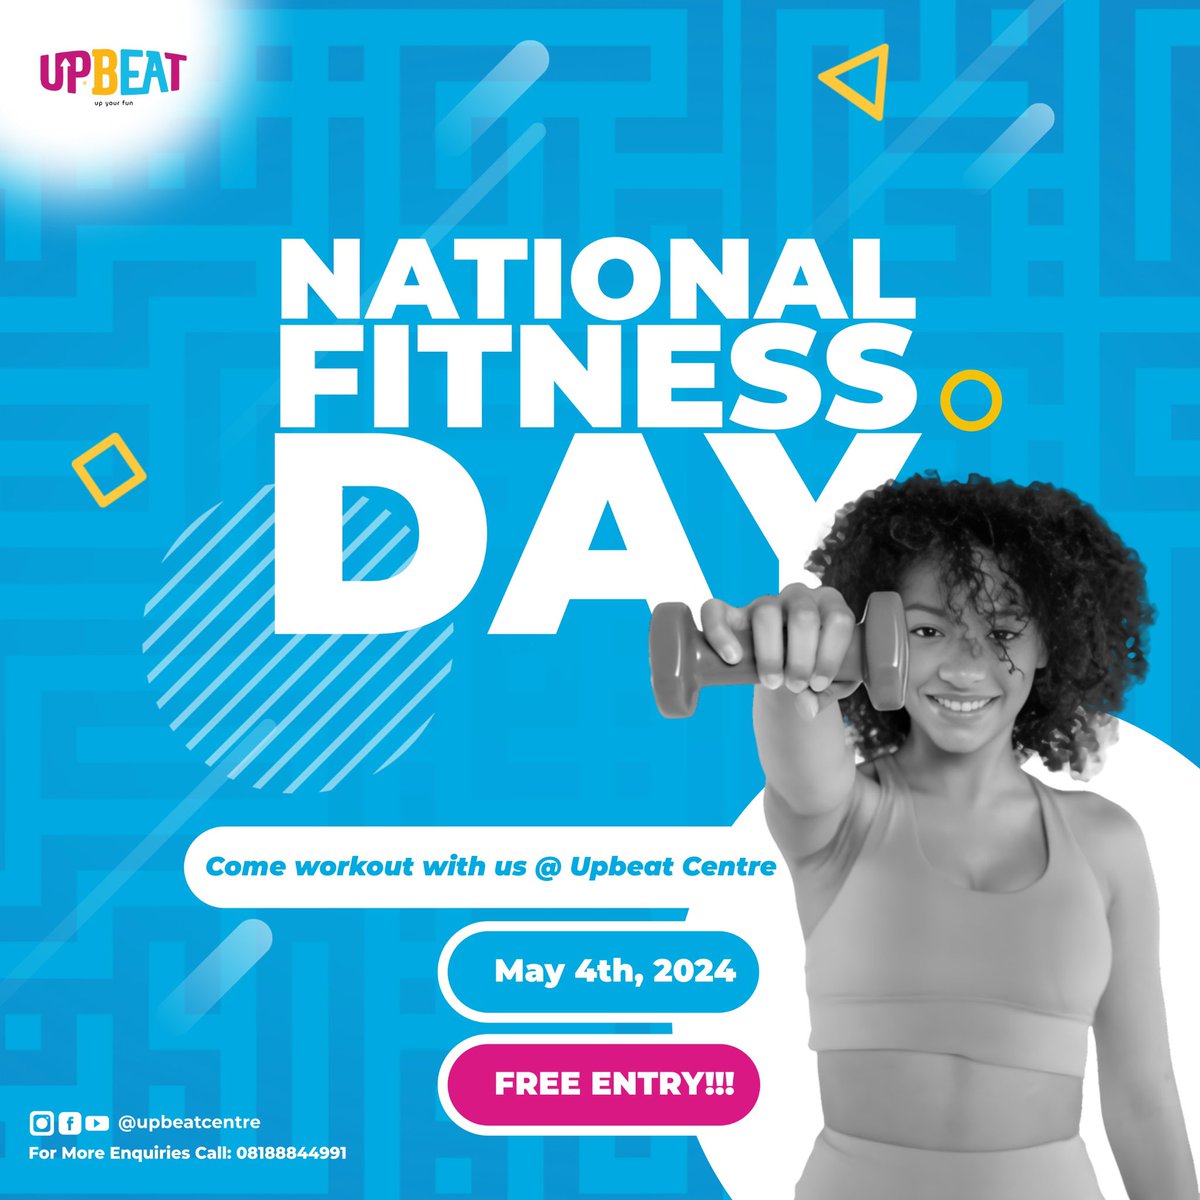 Come celebrate National Fitness Day with us at Upbeat Centre on May 4th! 

 #NationalFitnessDay #FreeFitnessDay #Upbeatcentre  #fyp #explore #events #funactivities #funfitness #lekki #lagos